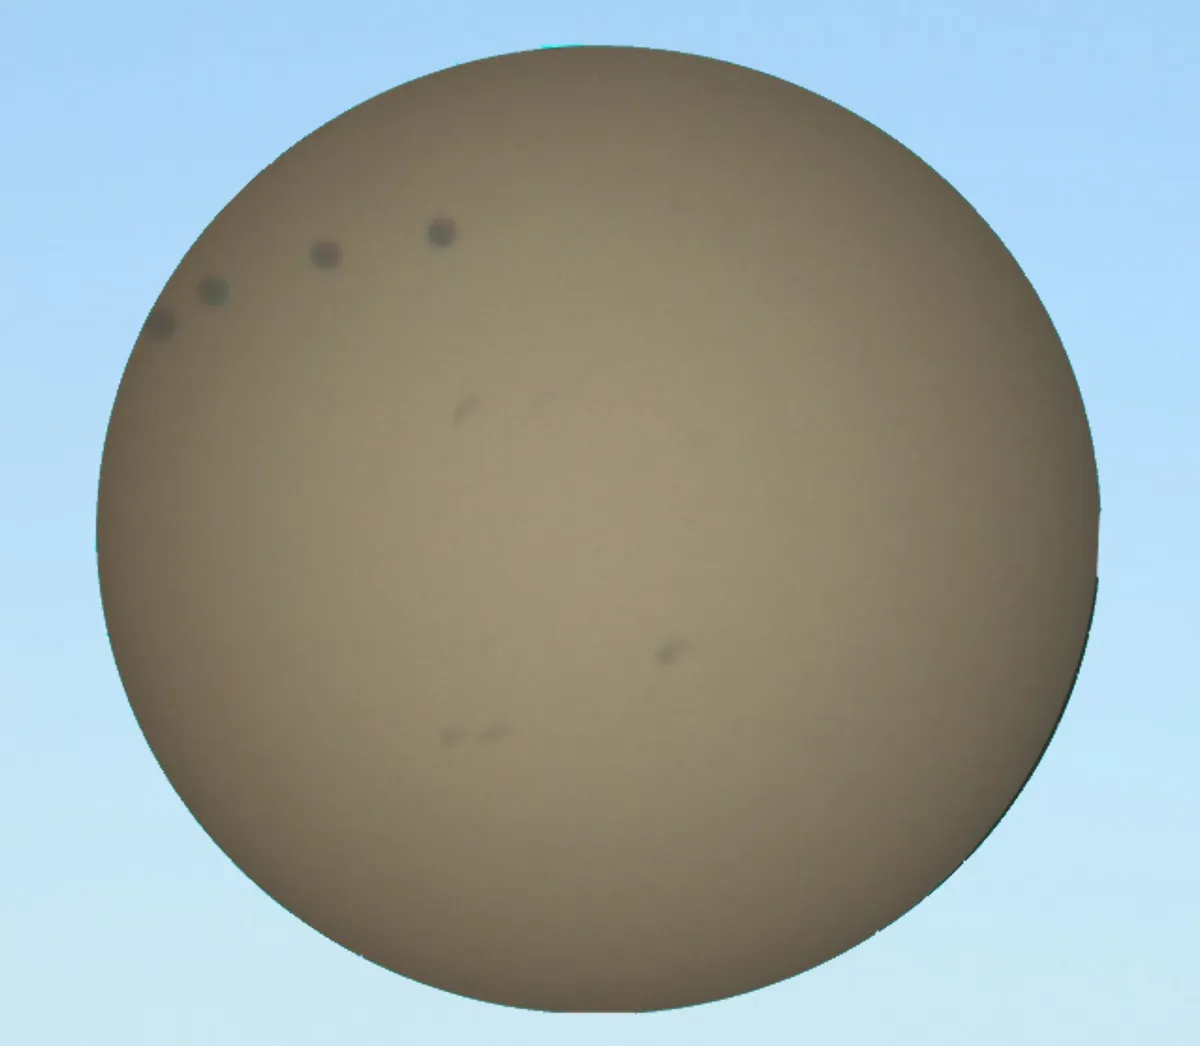 Composite of 4 Shots of the Transit of Venus by Rodger King, Palm Cove Beach, Cairns, Queensland, Australia. Equipment: Celeston 15x70 binoculars projecting on a white card. Pictures taken with a Canon 400D and a 55mm lens.